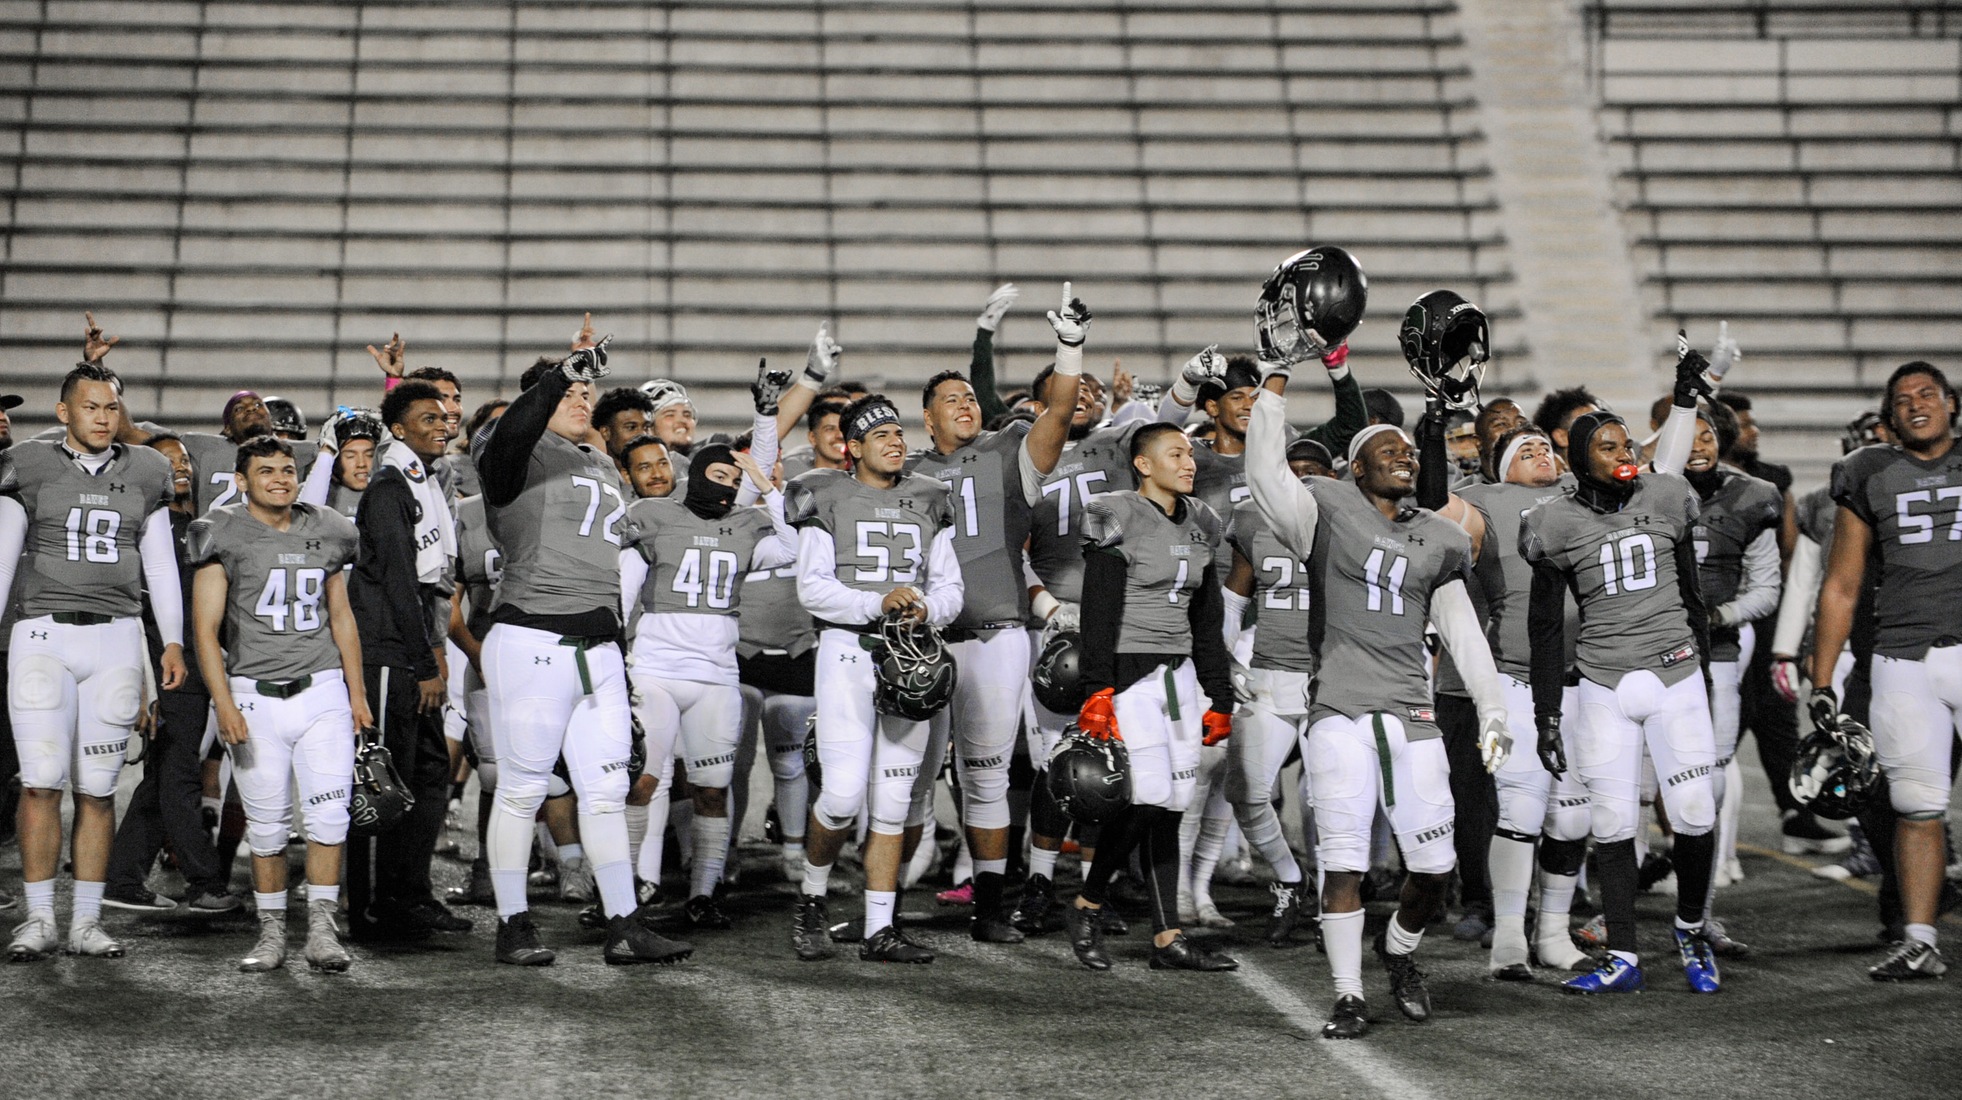 The East Los Angeles College football team reacts to the home crowd giving them a rousing ovation several minutes after the Huskies 20-13 win over Long Beach City College. (Photo by Tadzio Garcia)